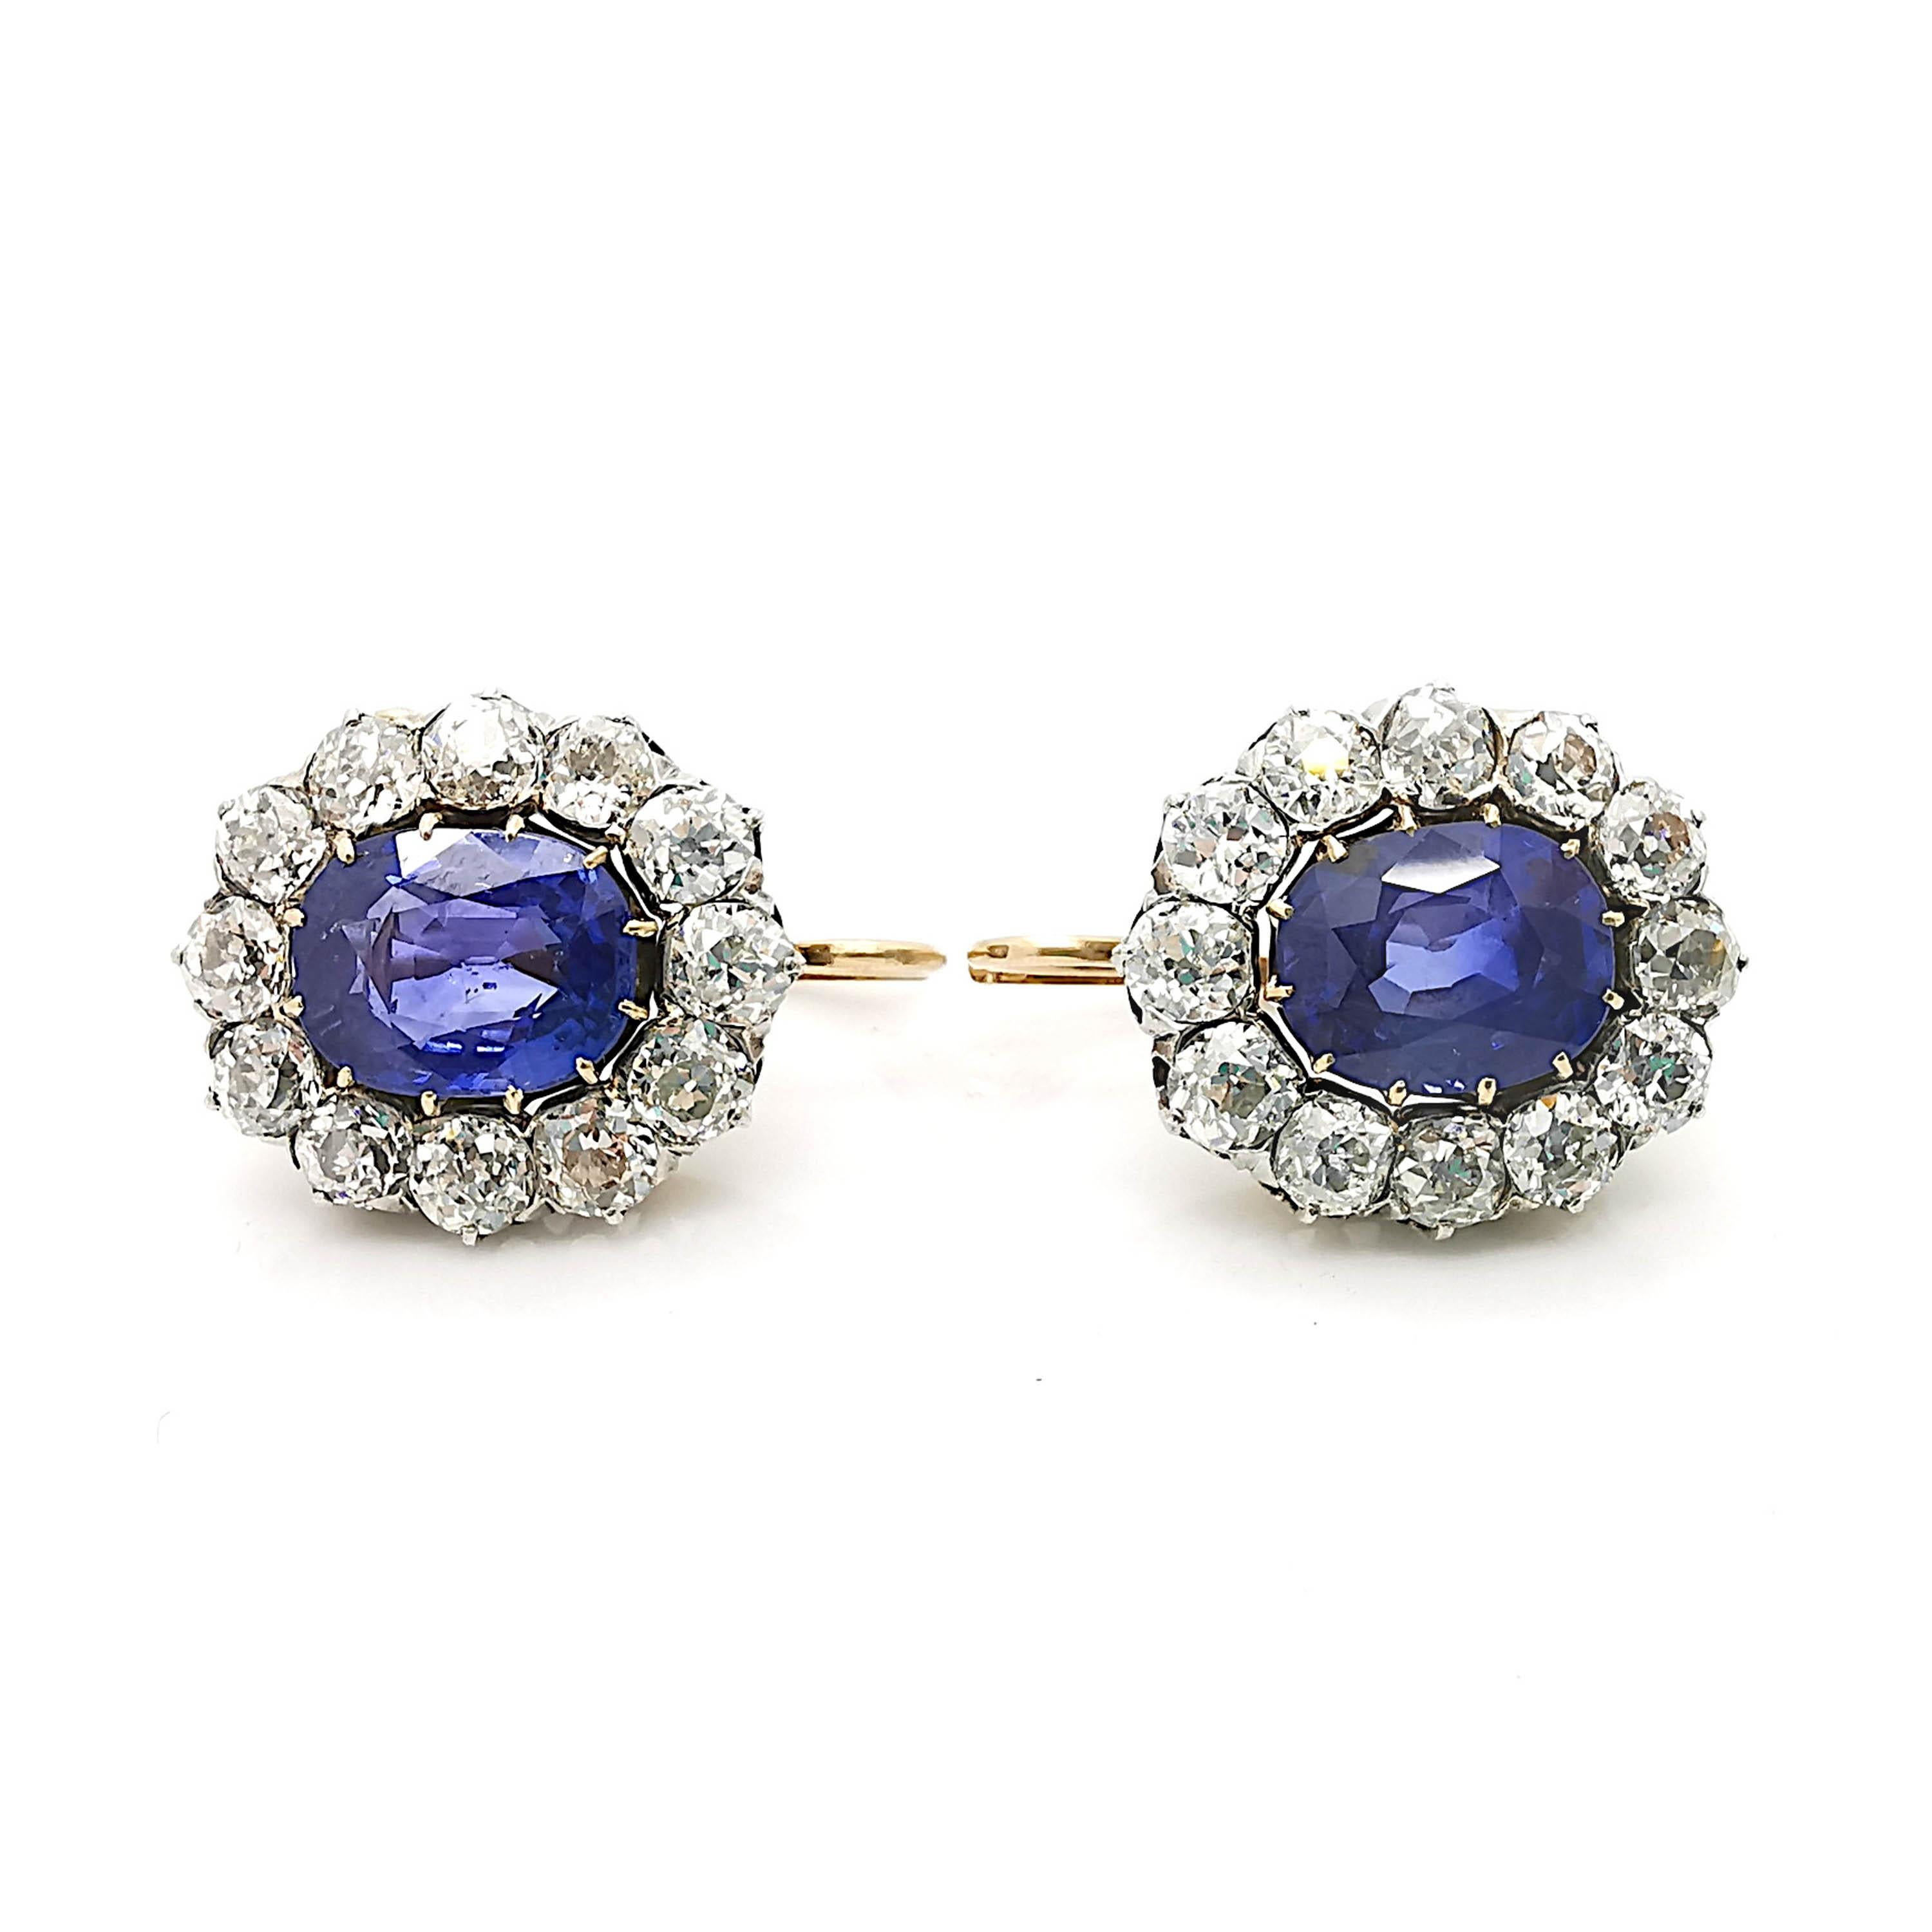 Women's Sapphire And Diamond Cluster Earrings, Platinum And Gold, Circa 1890 For Sale